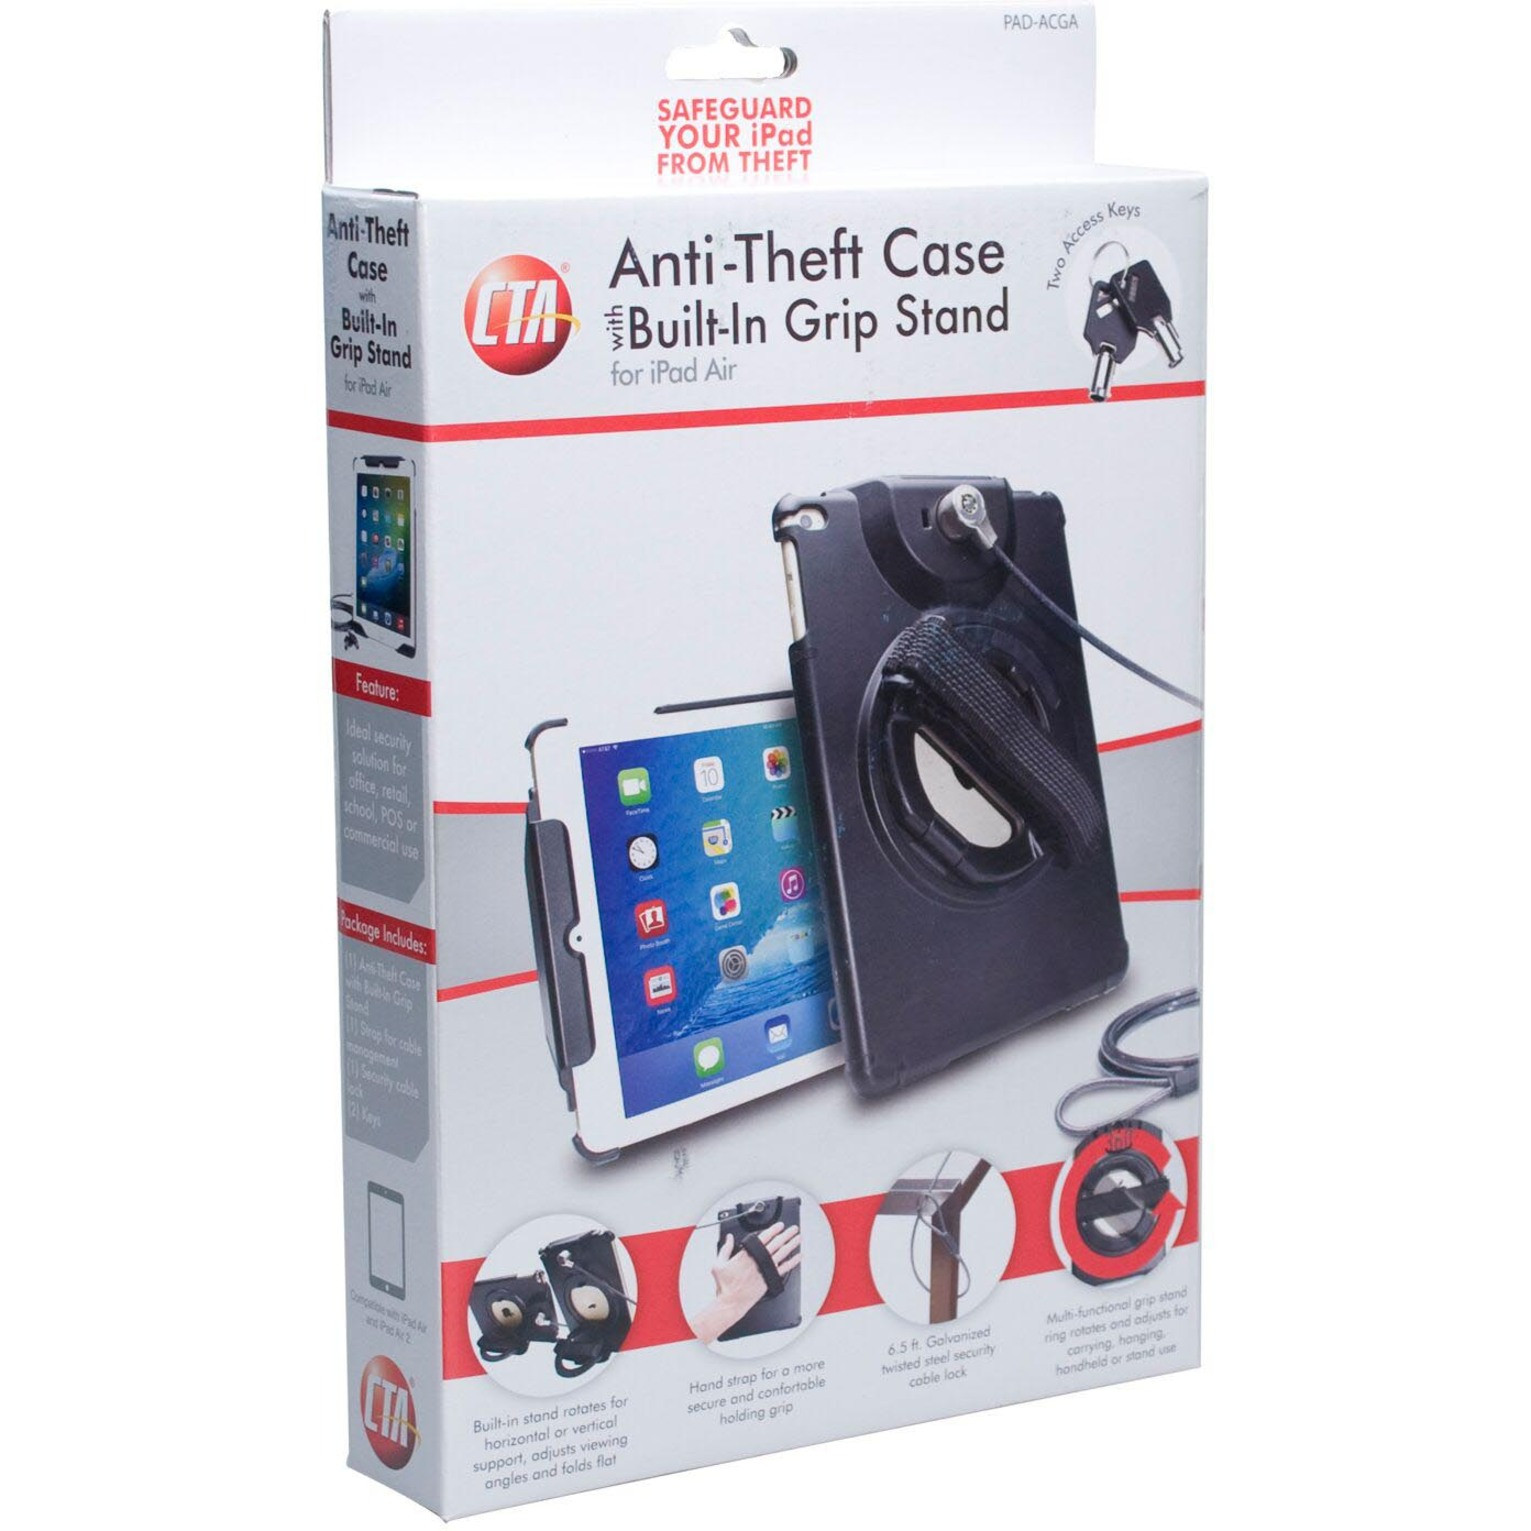 Cta Digital Accessories Anti-Theft Case with Built-In Grip Stand for iPad Air and iPad Pro 9.7Black PAD-ACGA